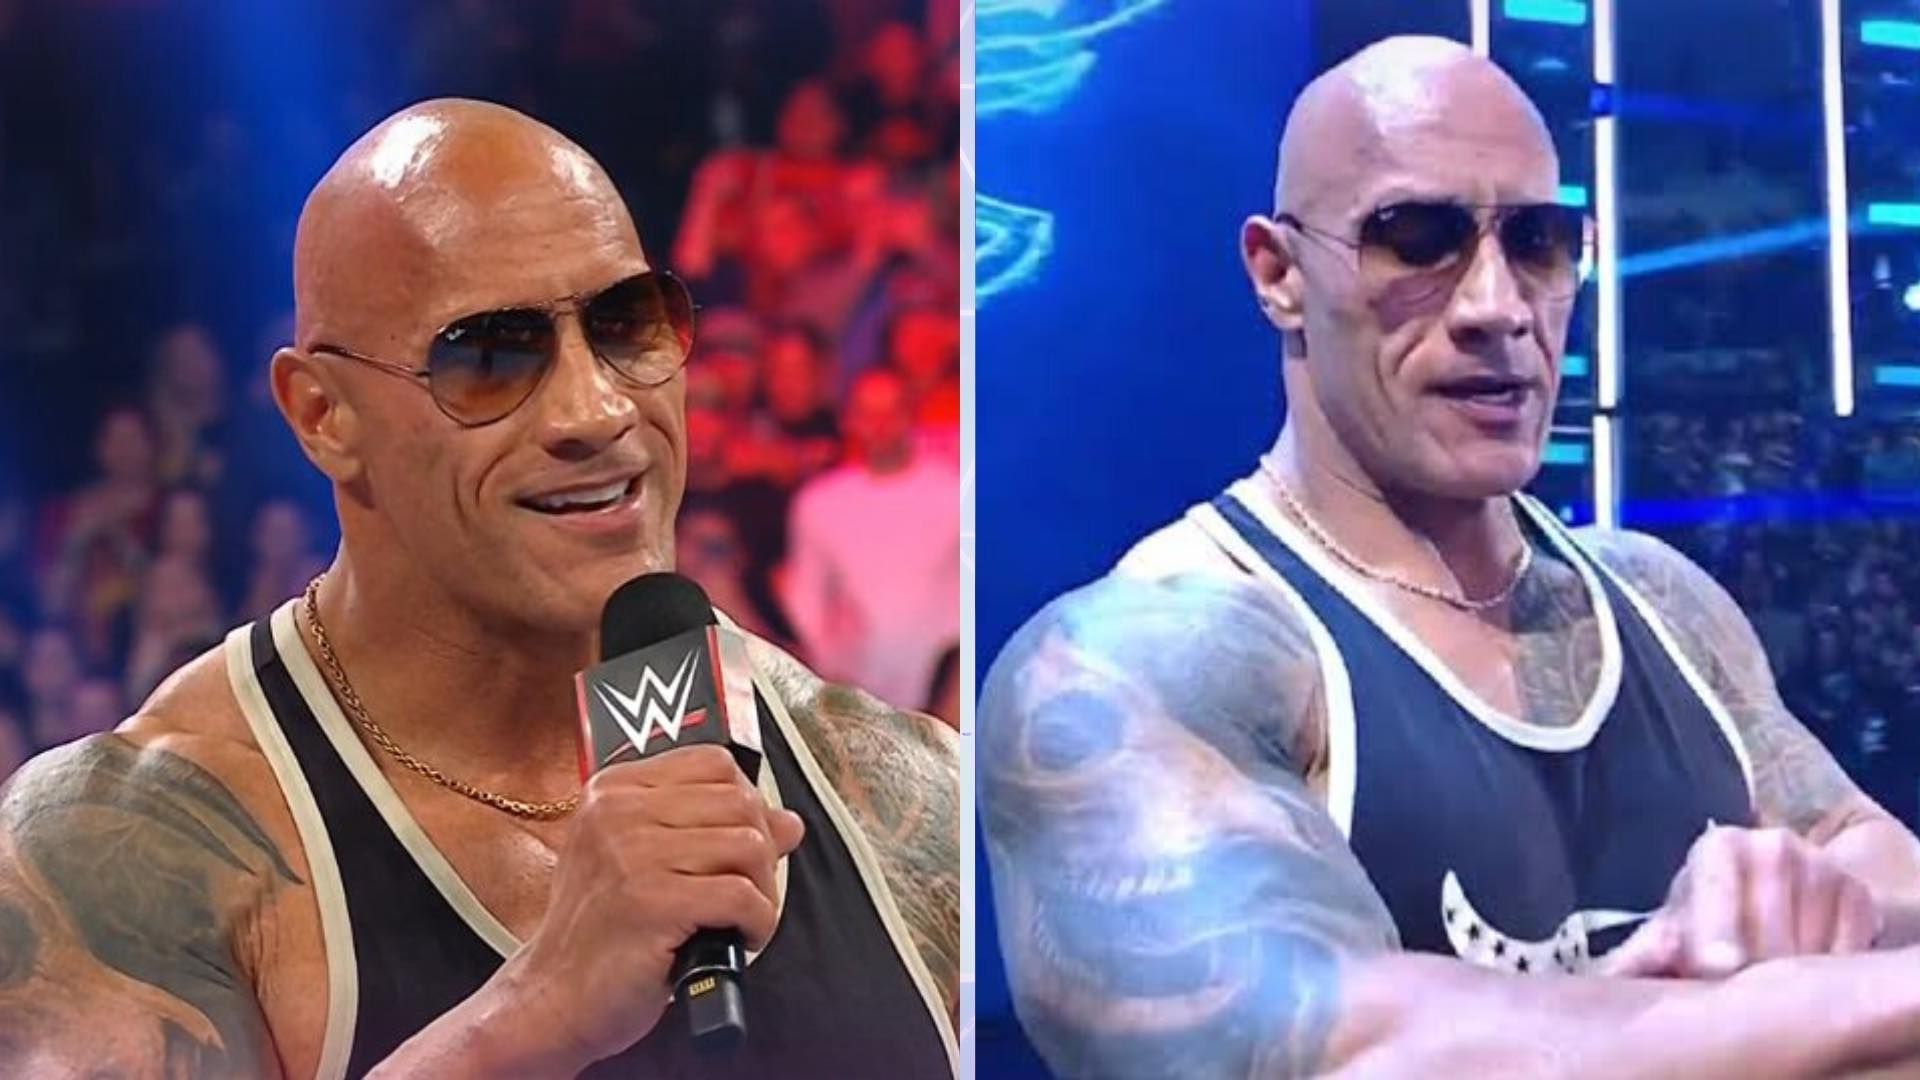 The Rock showed up unannounced at WWE RAW: Day 1.